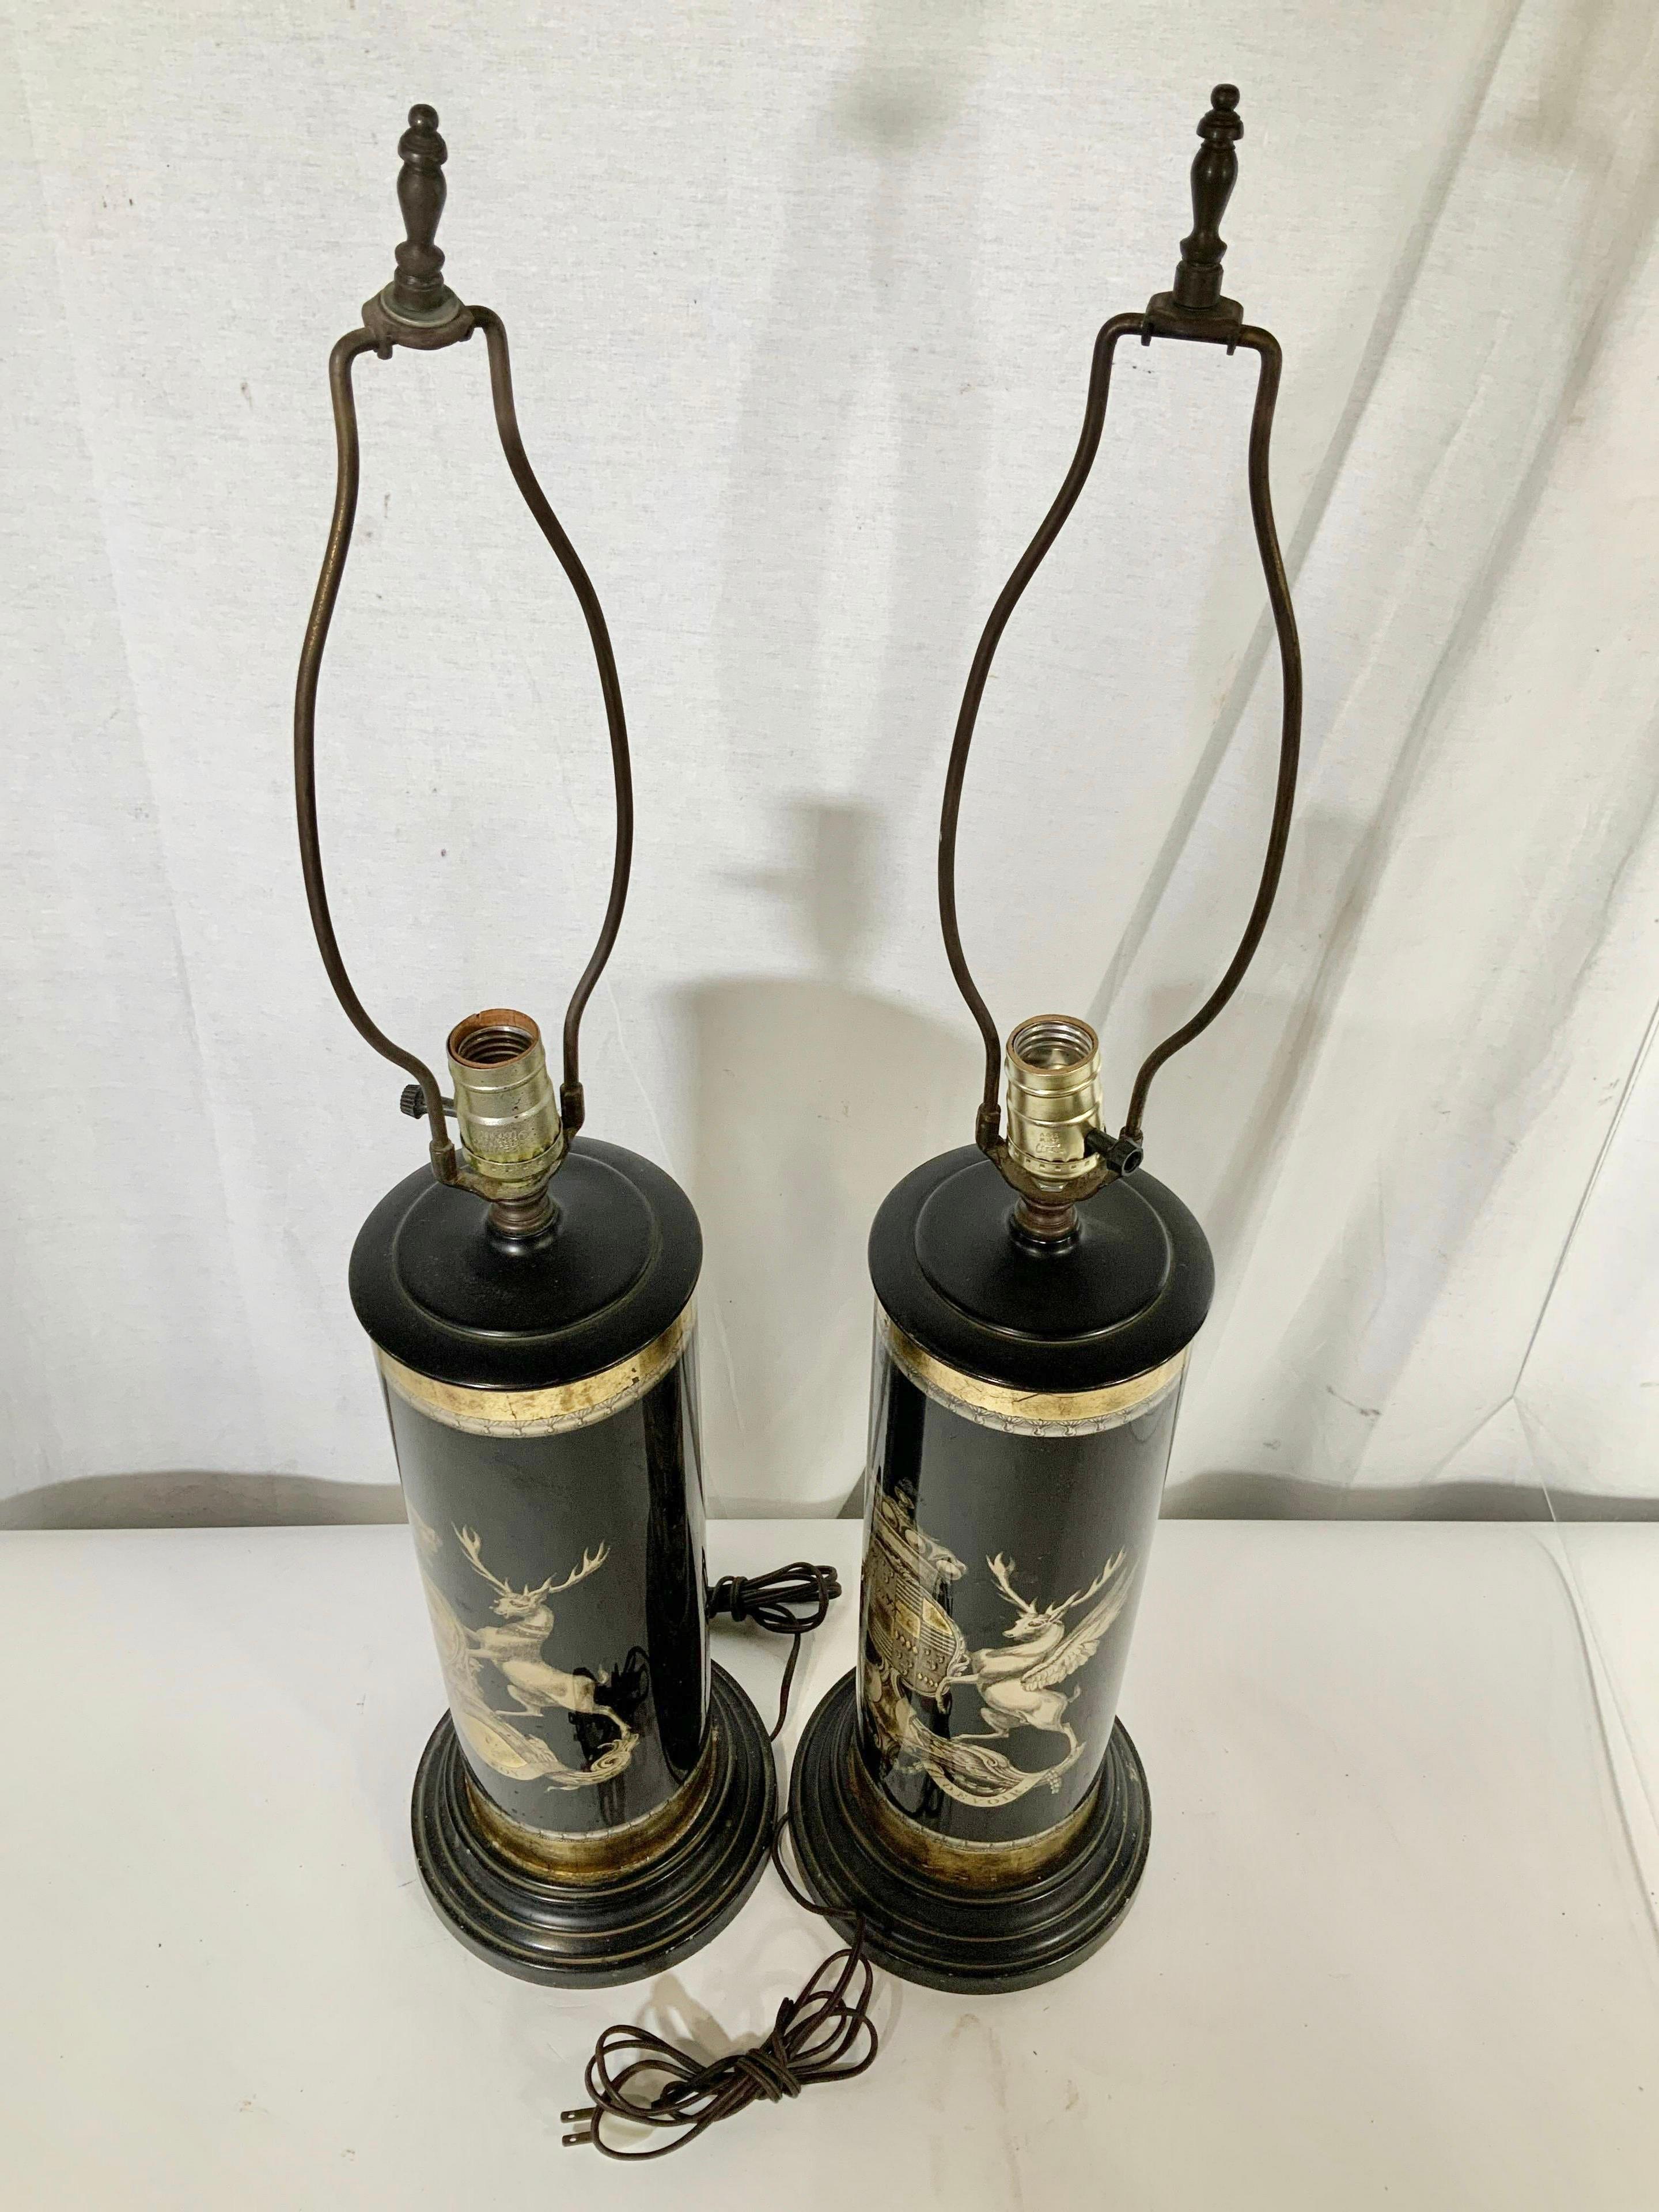 Pair of Verre Églomisé Lamps Coats of Arms for the Earls Bathurst and Granville For Sale 4